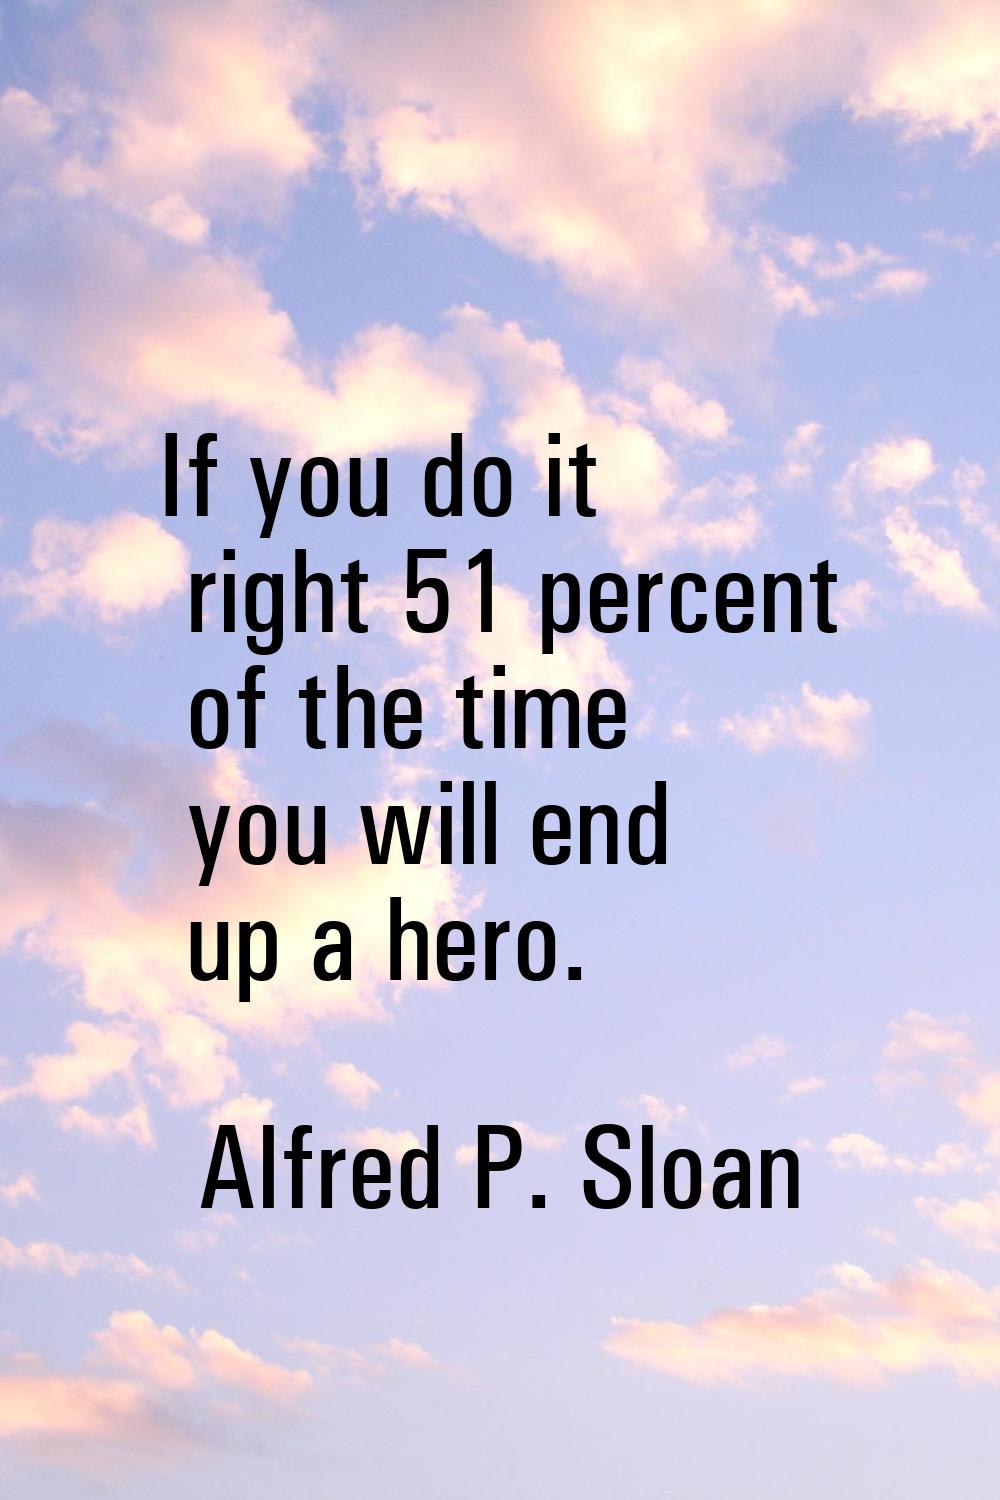 If you do it right 51 percent of the time you will end up a hero.